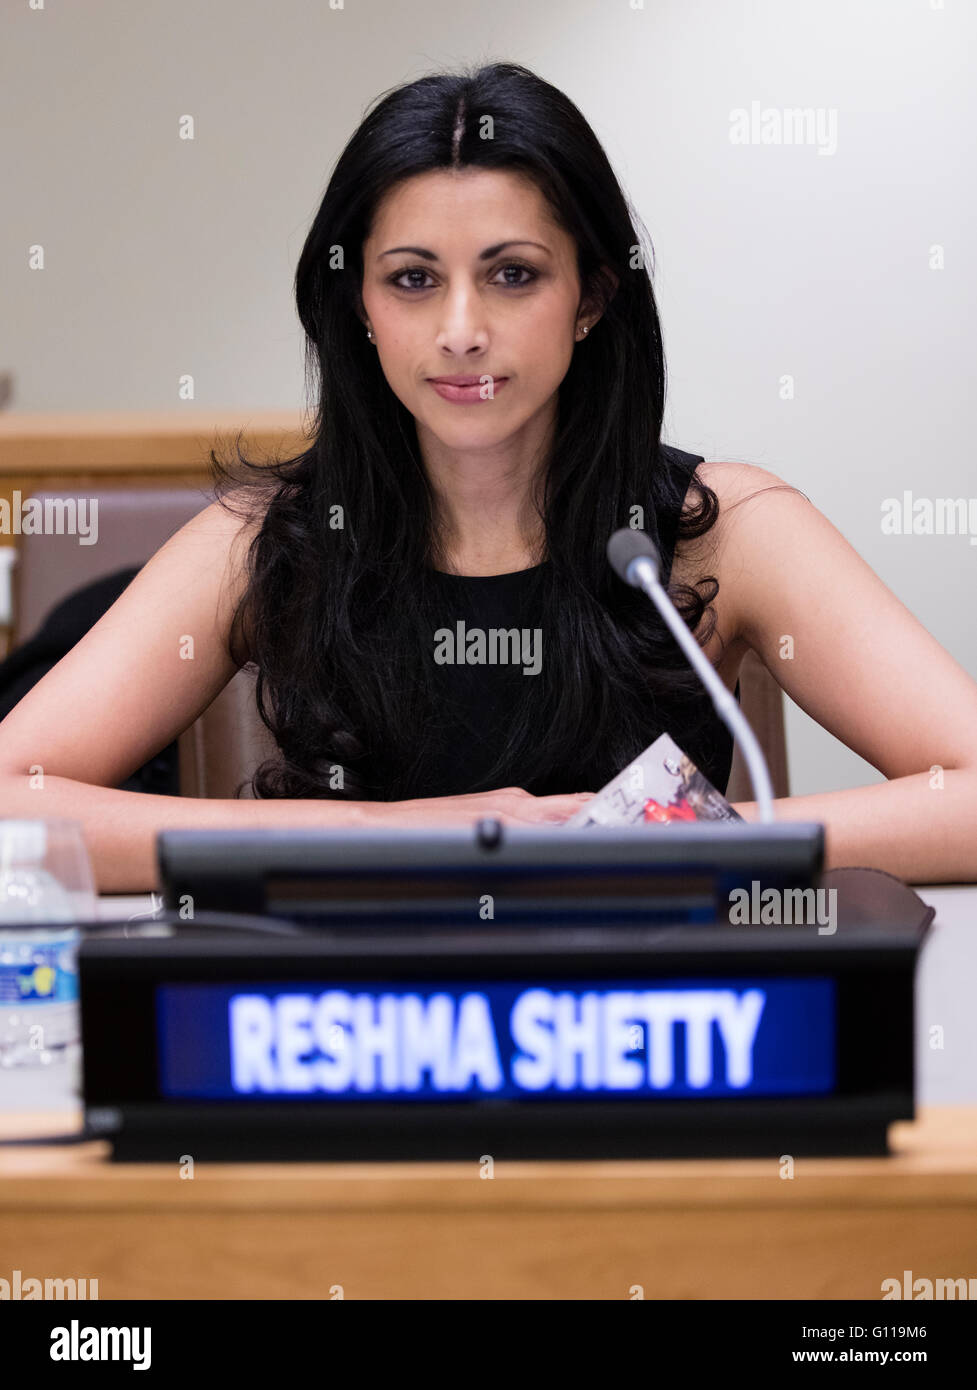 New York City, United States. 03rd May, 2016. British-American television and film actress Reshma Shetty participated on a special event entitled “Voices of Victims of Human Trafficking: Readings from River of Flesh and Other Stories”. The event was organized by the United Nations Office on Drugs and Crime (UNODC) in partnership with the non-governmental organization Apne Aap Women Worldwide today at the UN Headquarters in New York. © Luiz Rampelotto/PacificPress/Alamy Live News Stock Photo